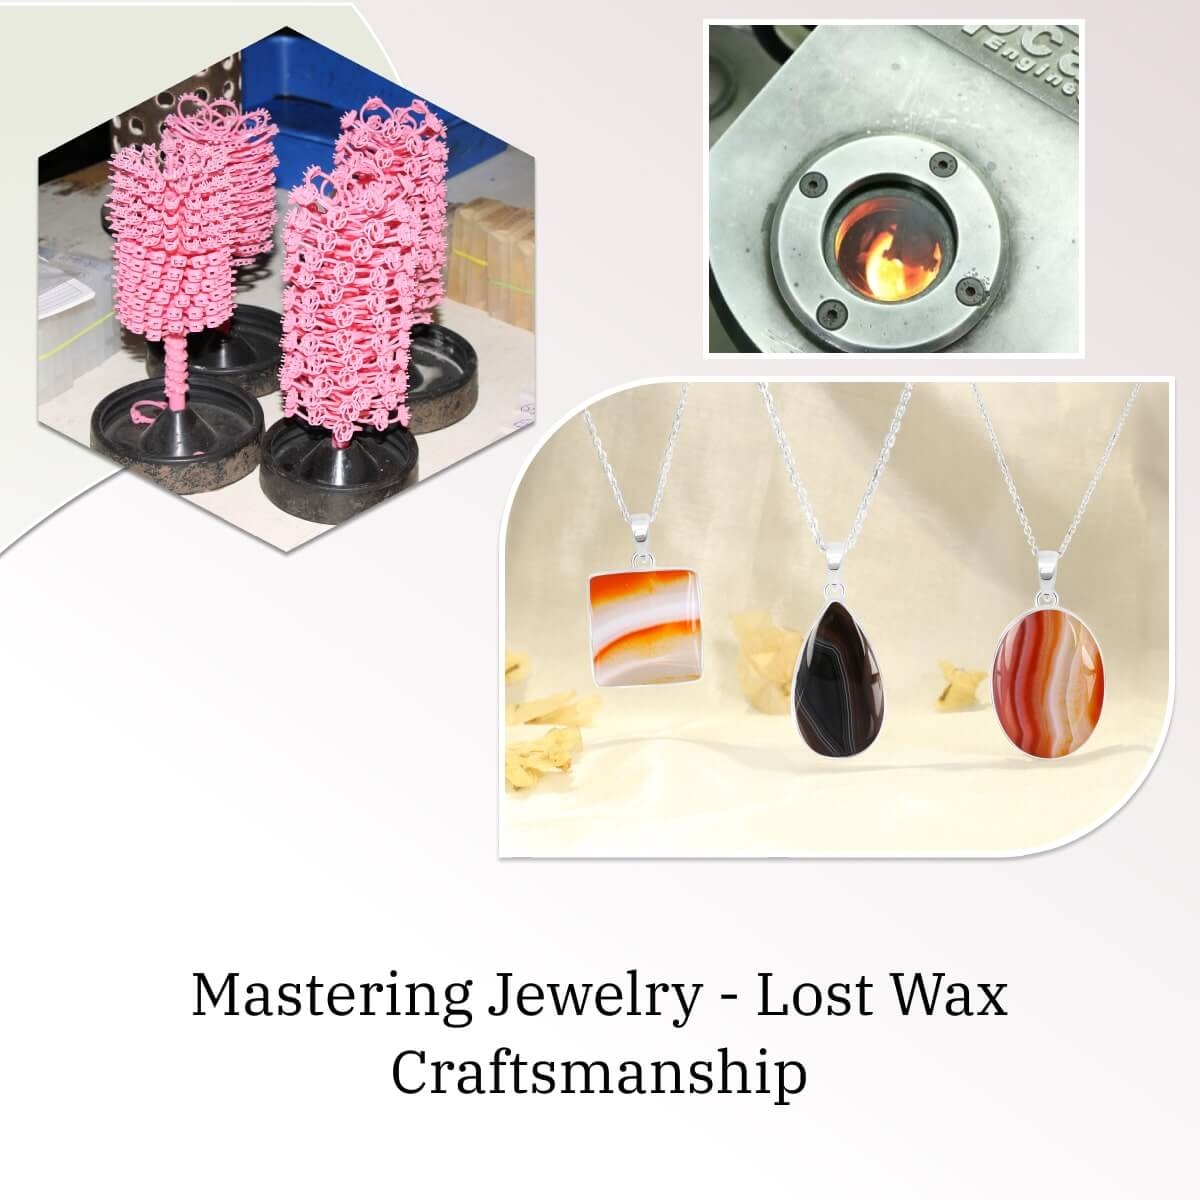 Lost Wax Casting in the Jewelry Industry